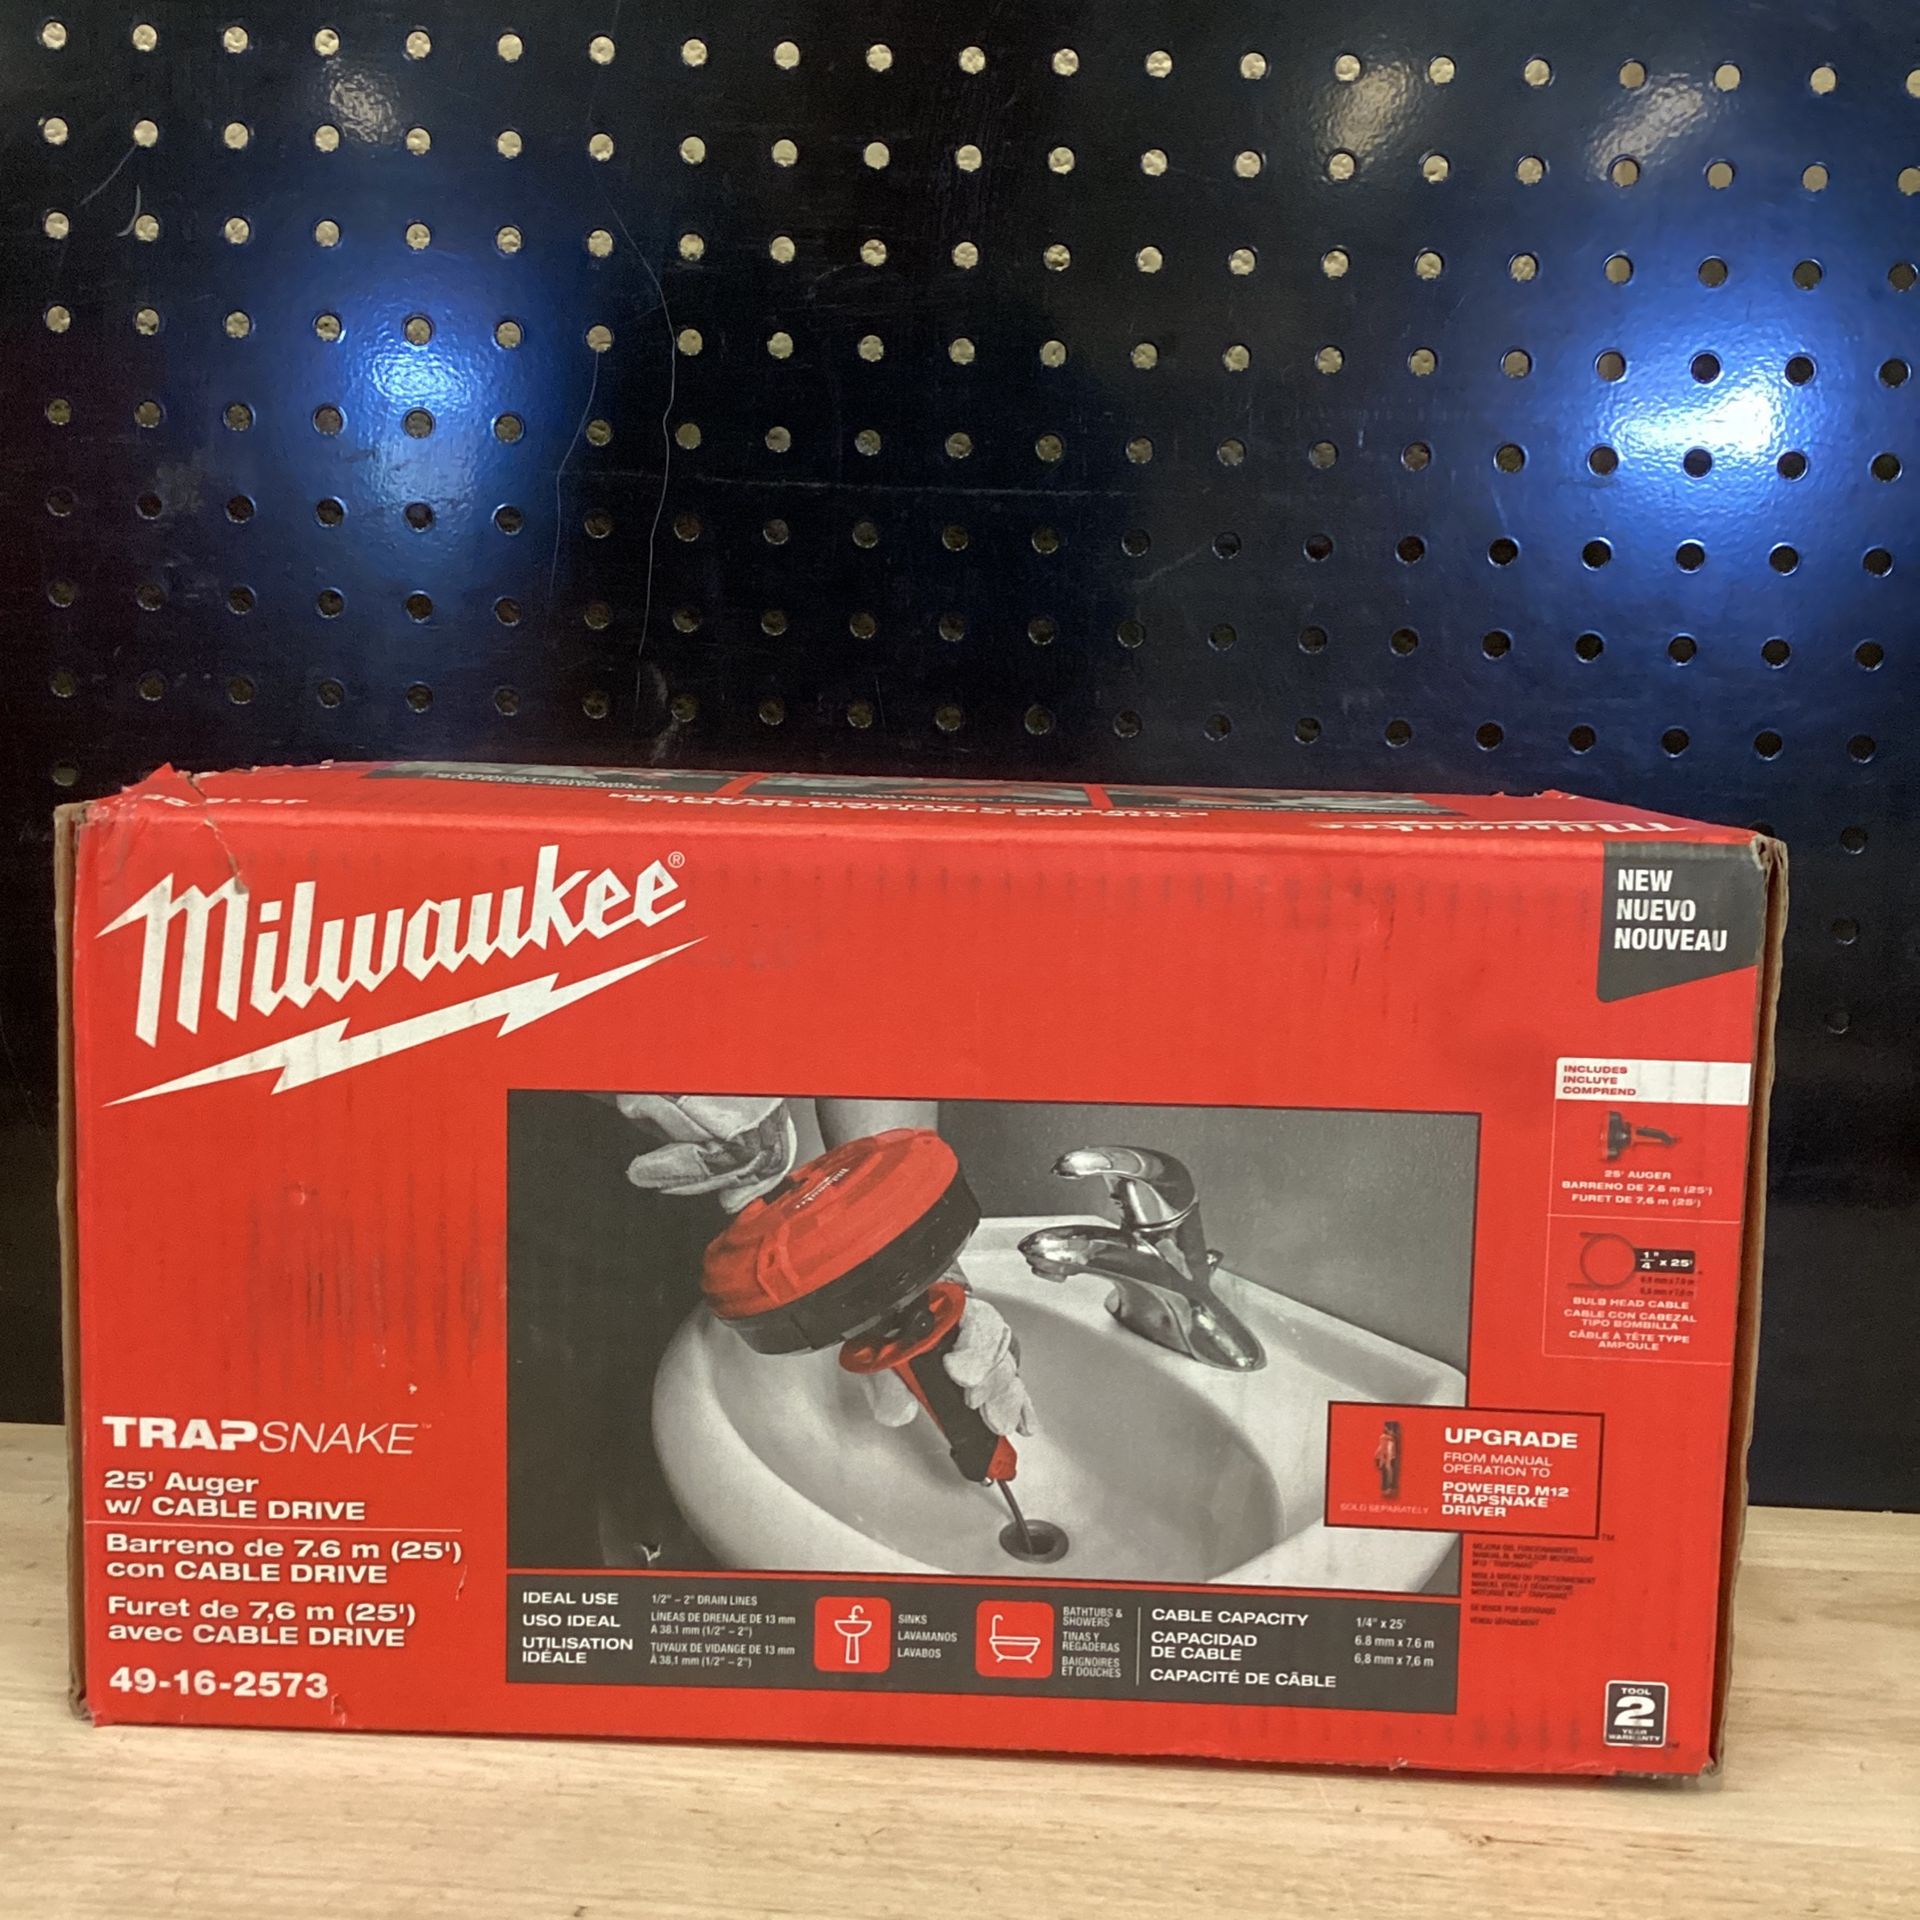 Milwaukee Trap Snake Auger Drain Cleaning Kit 49-16-2573 - The Home Depot